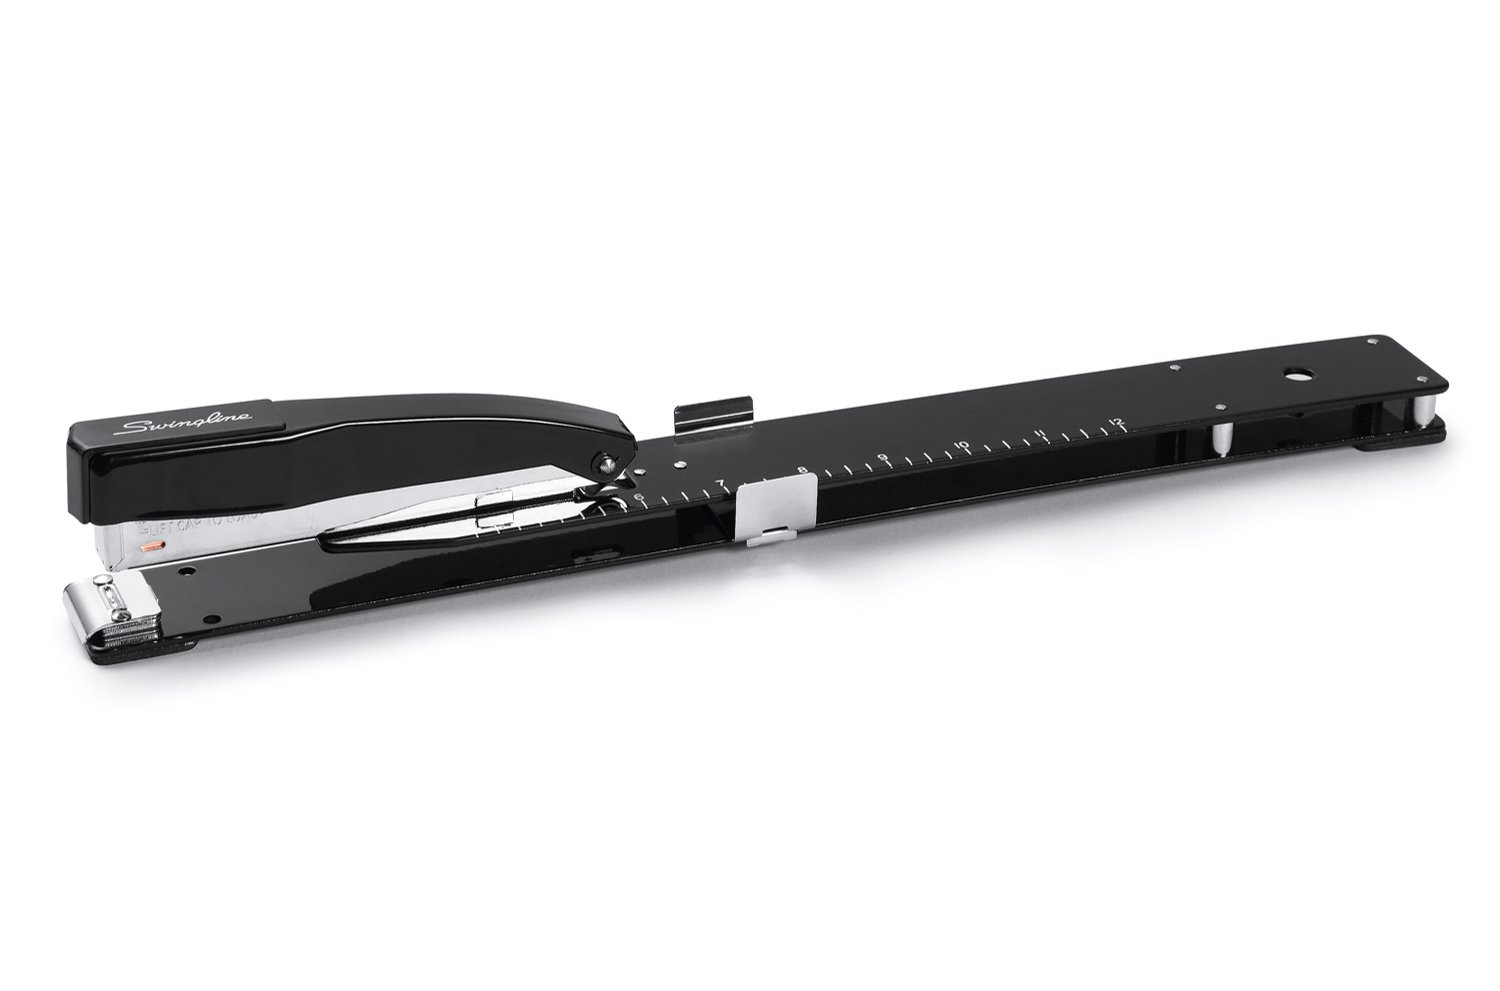 Swingline Long Reach Stapler with Built-in Ruler and Adjustable Locking Paper Guide